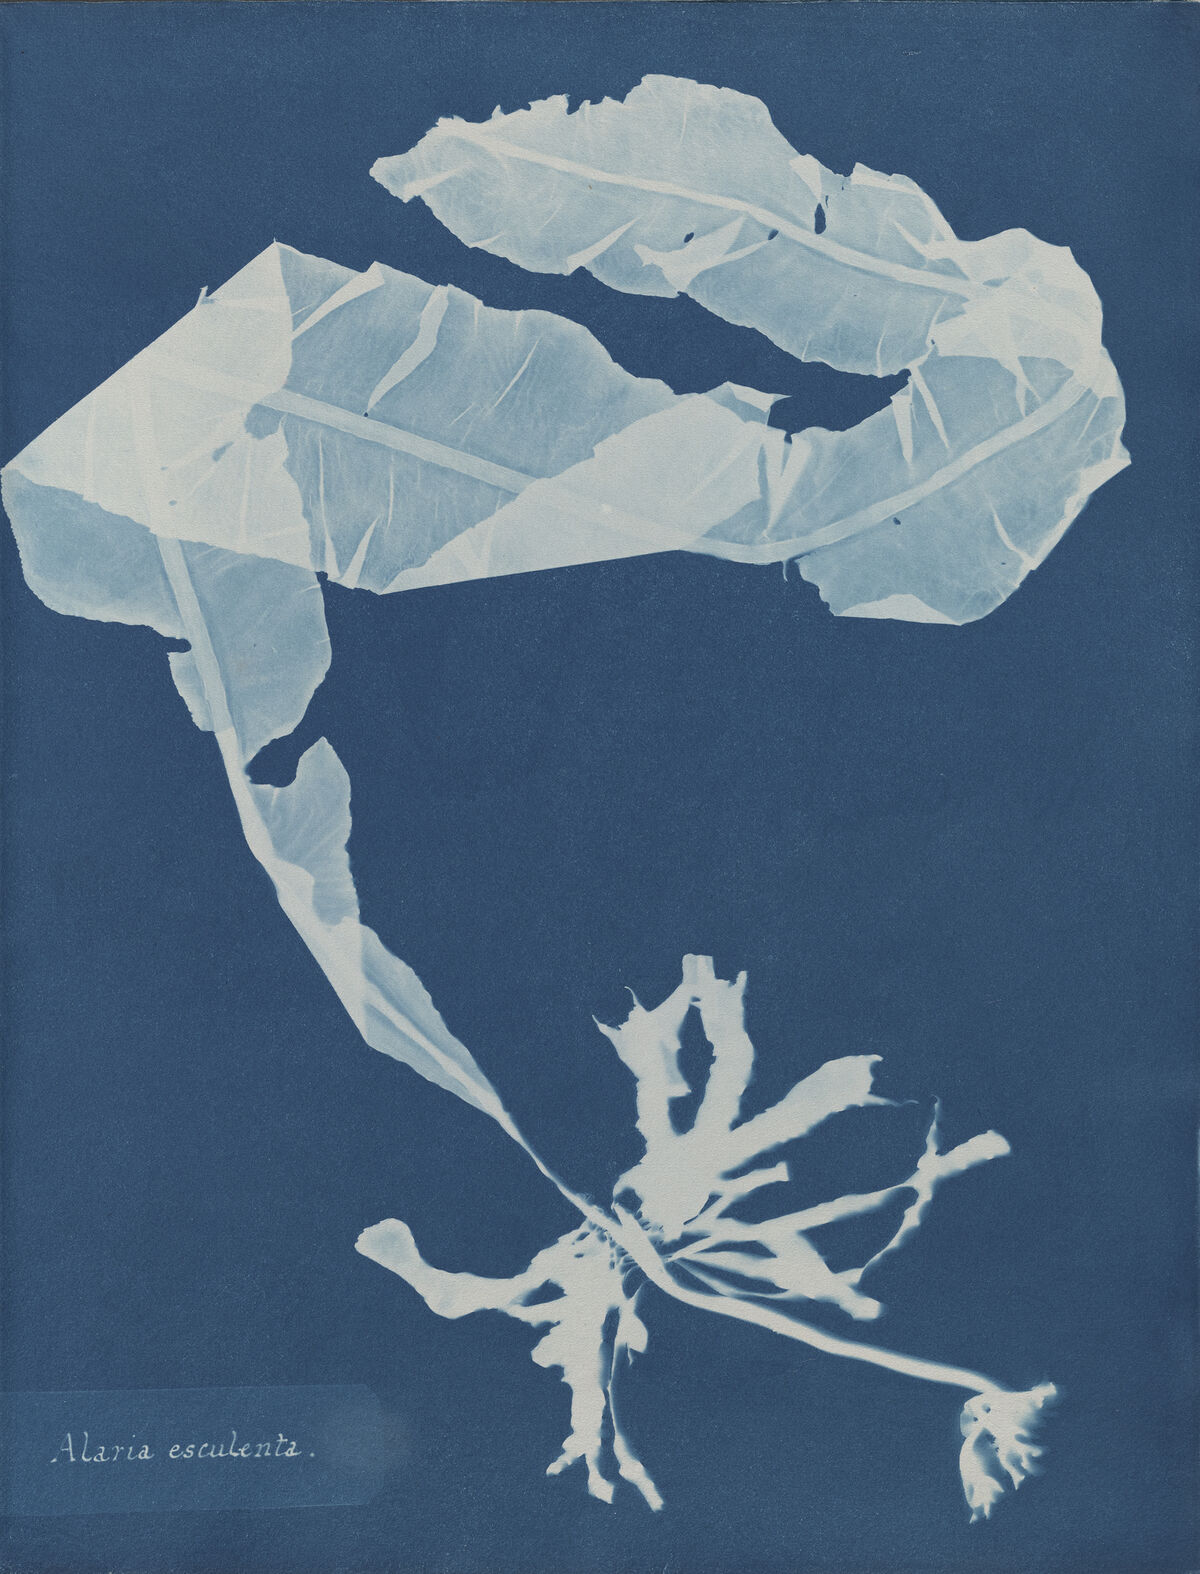 Anna Atkins, Alaria esculenta, from Part XII of Photographs of British Algae: Cyanotype Impressions, 1849-1850. Courtesy of The New York Public Library.